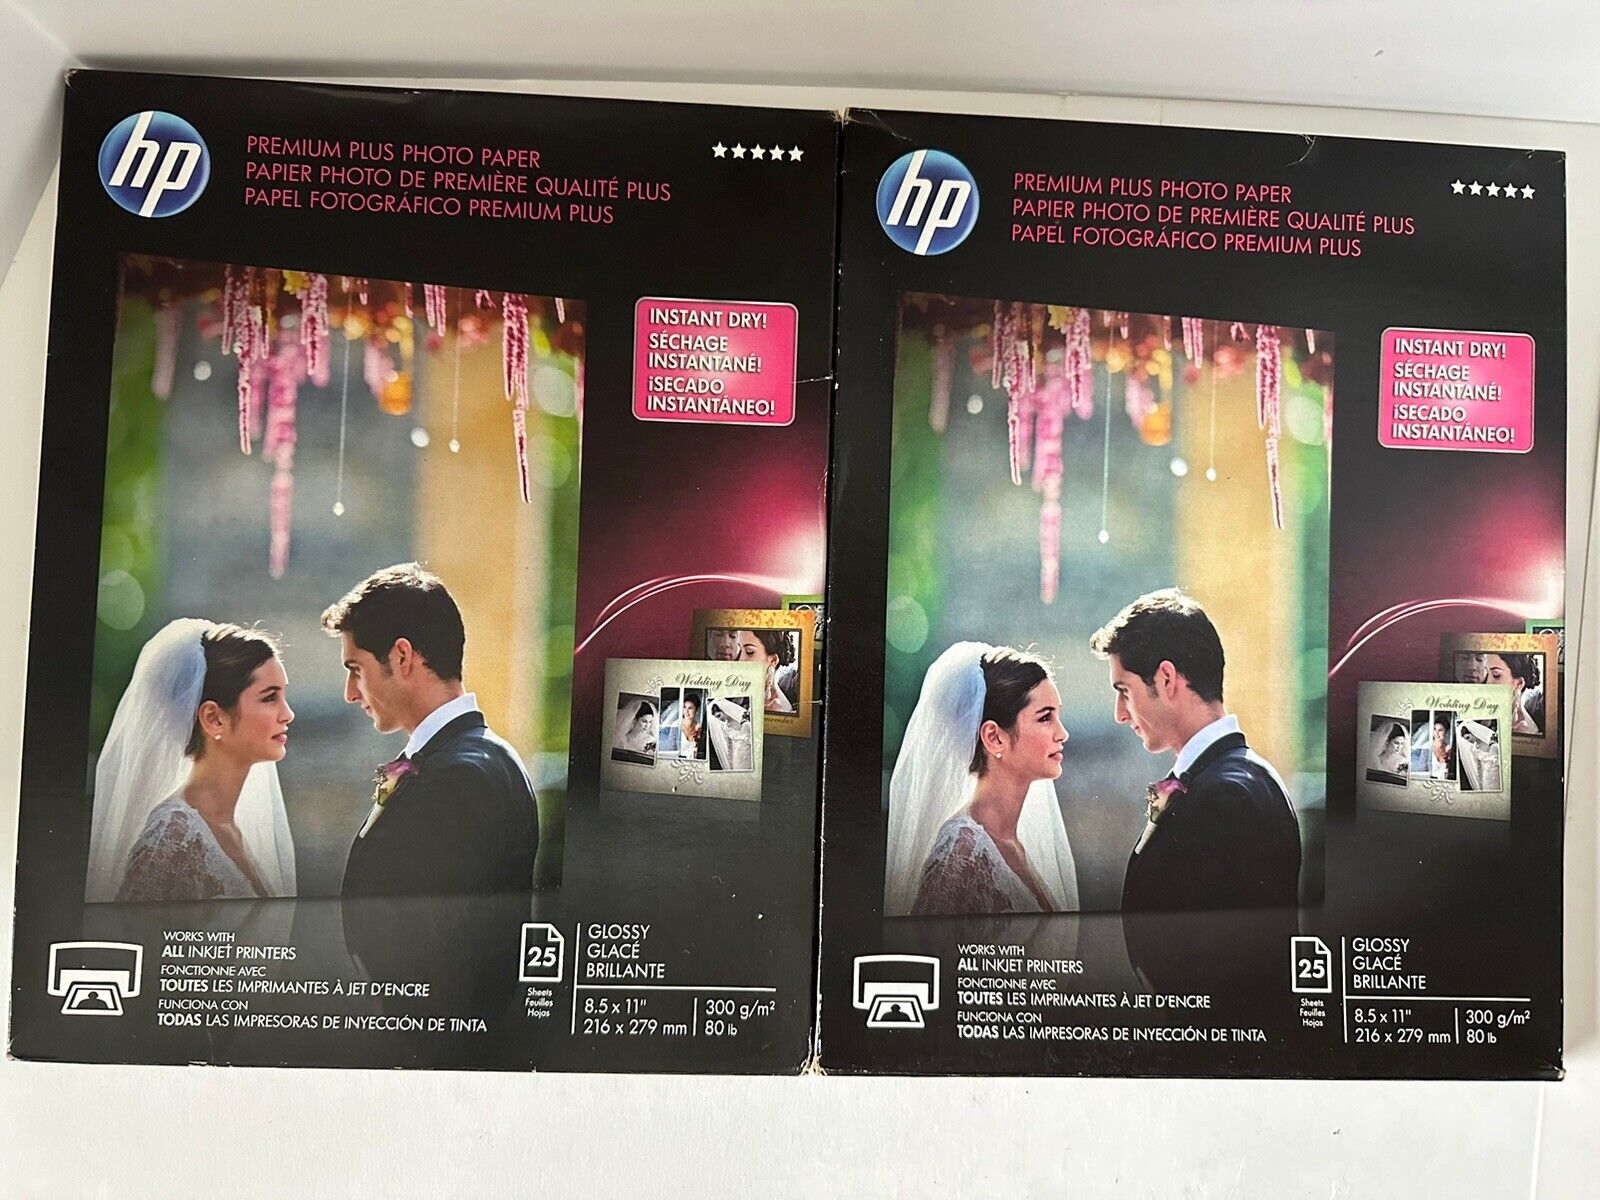 HP Premium Plus Glossy Photo Paper - 25 Sheets 8.5 x 11 (lot of 2) CR670A - New